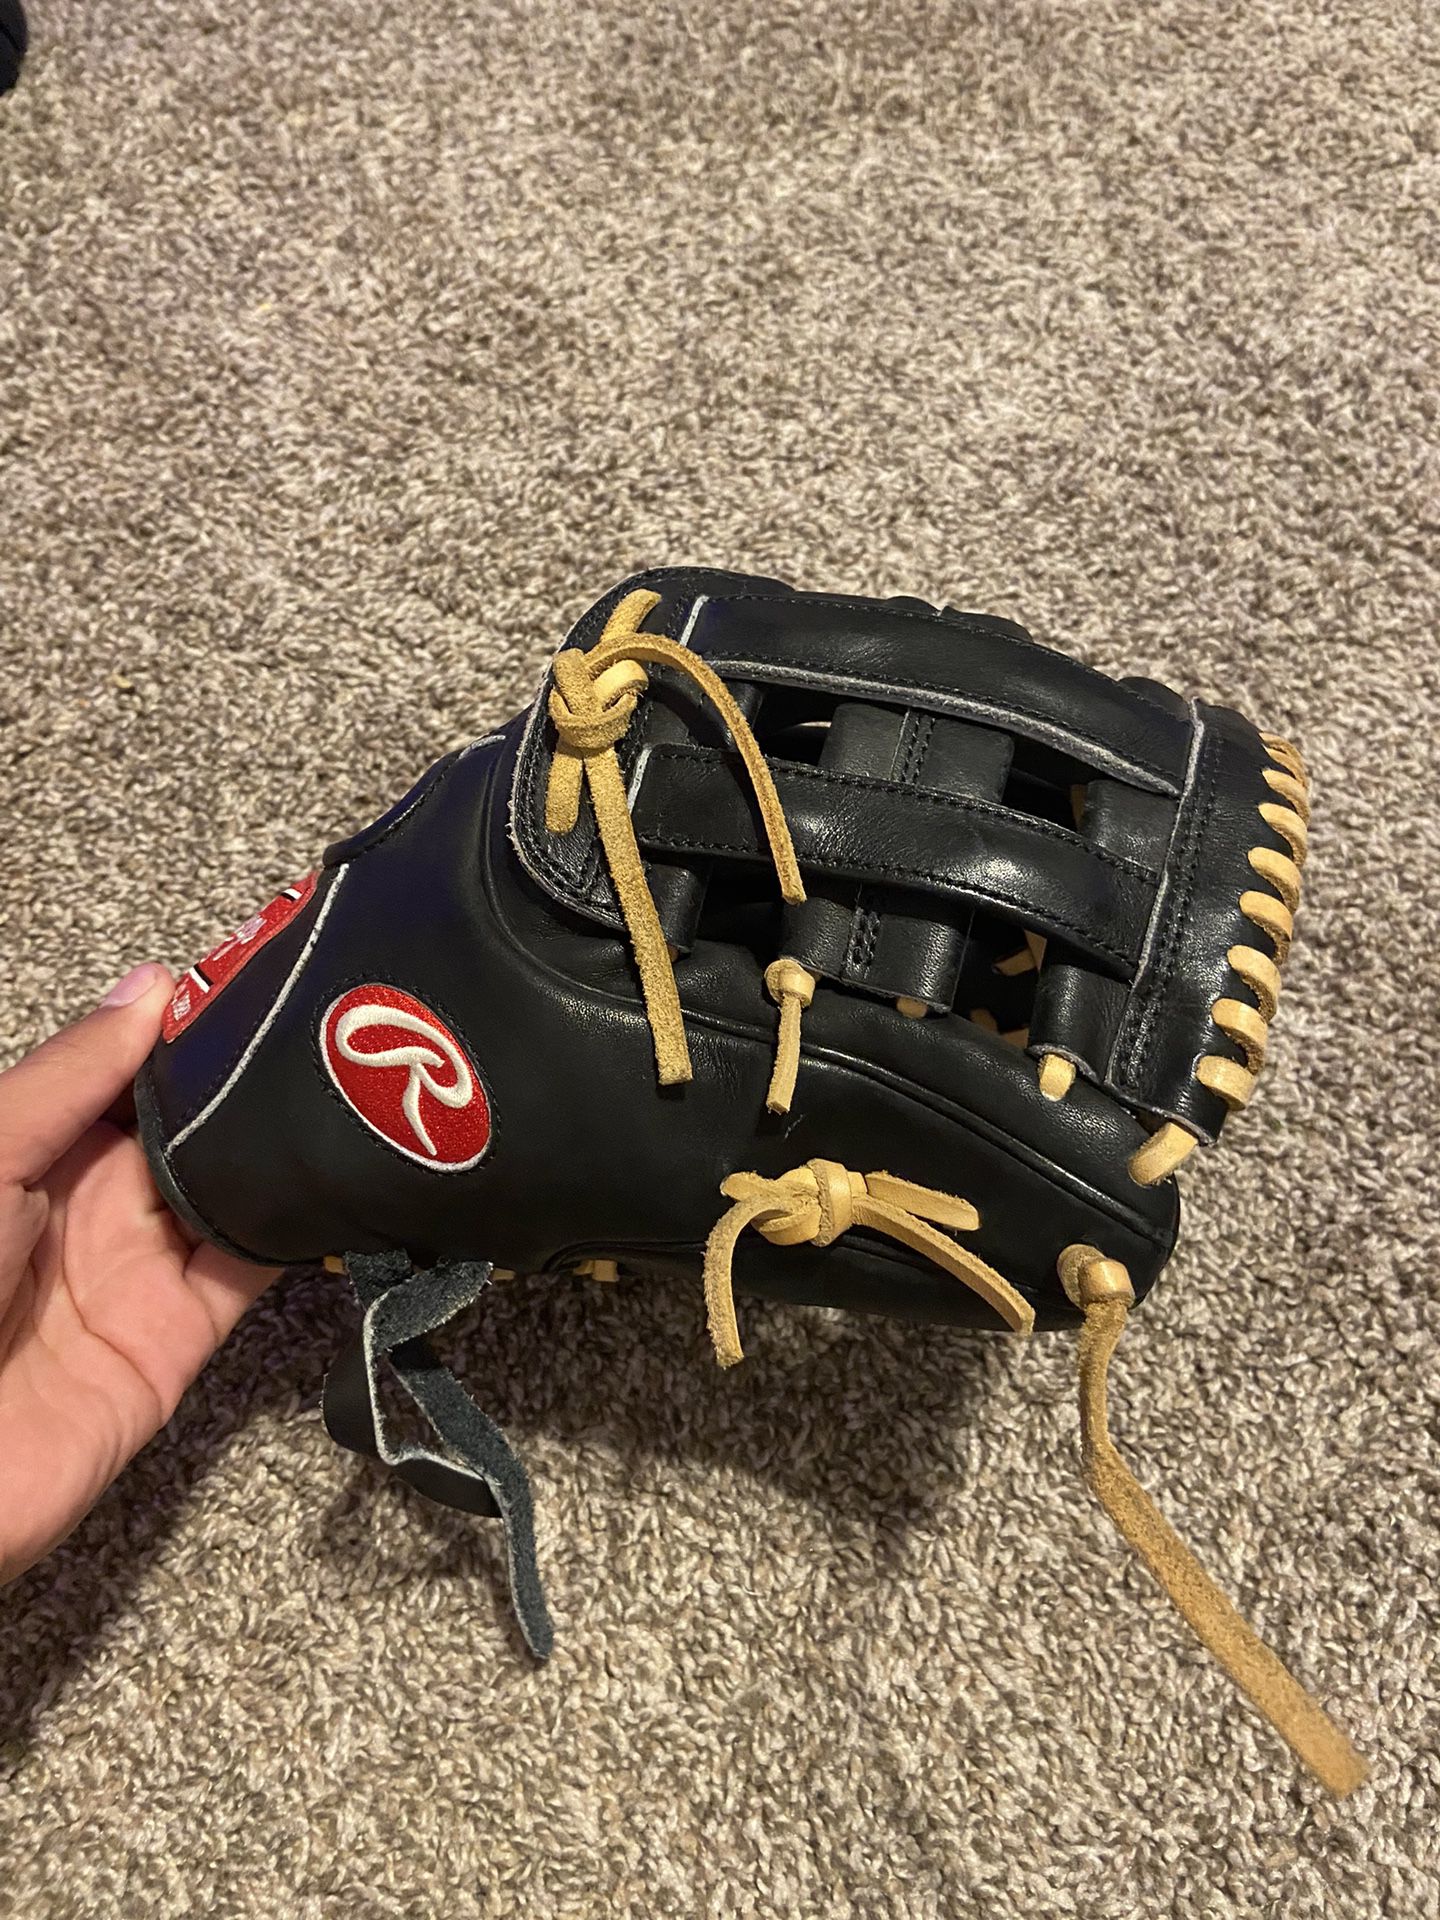 Rawlings Heart Of The Hide Pro314-6bc 11 1/2 Inch